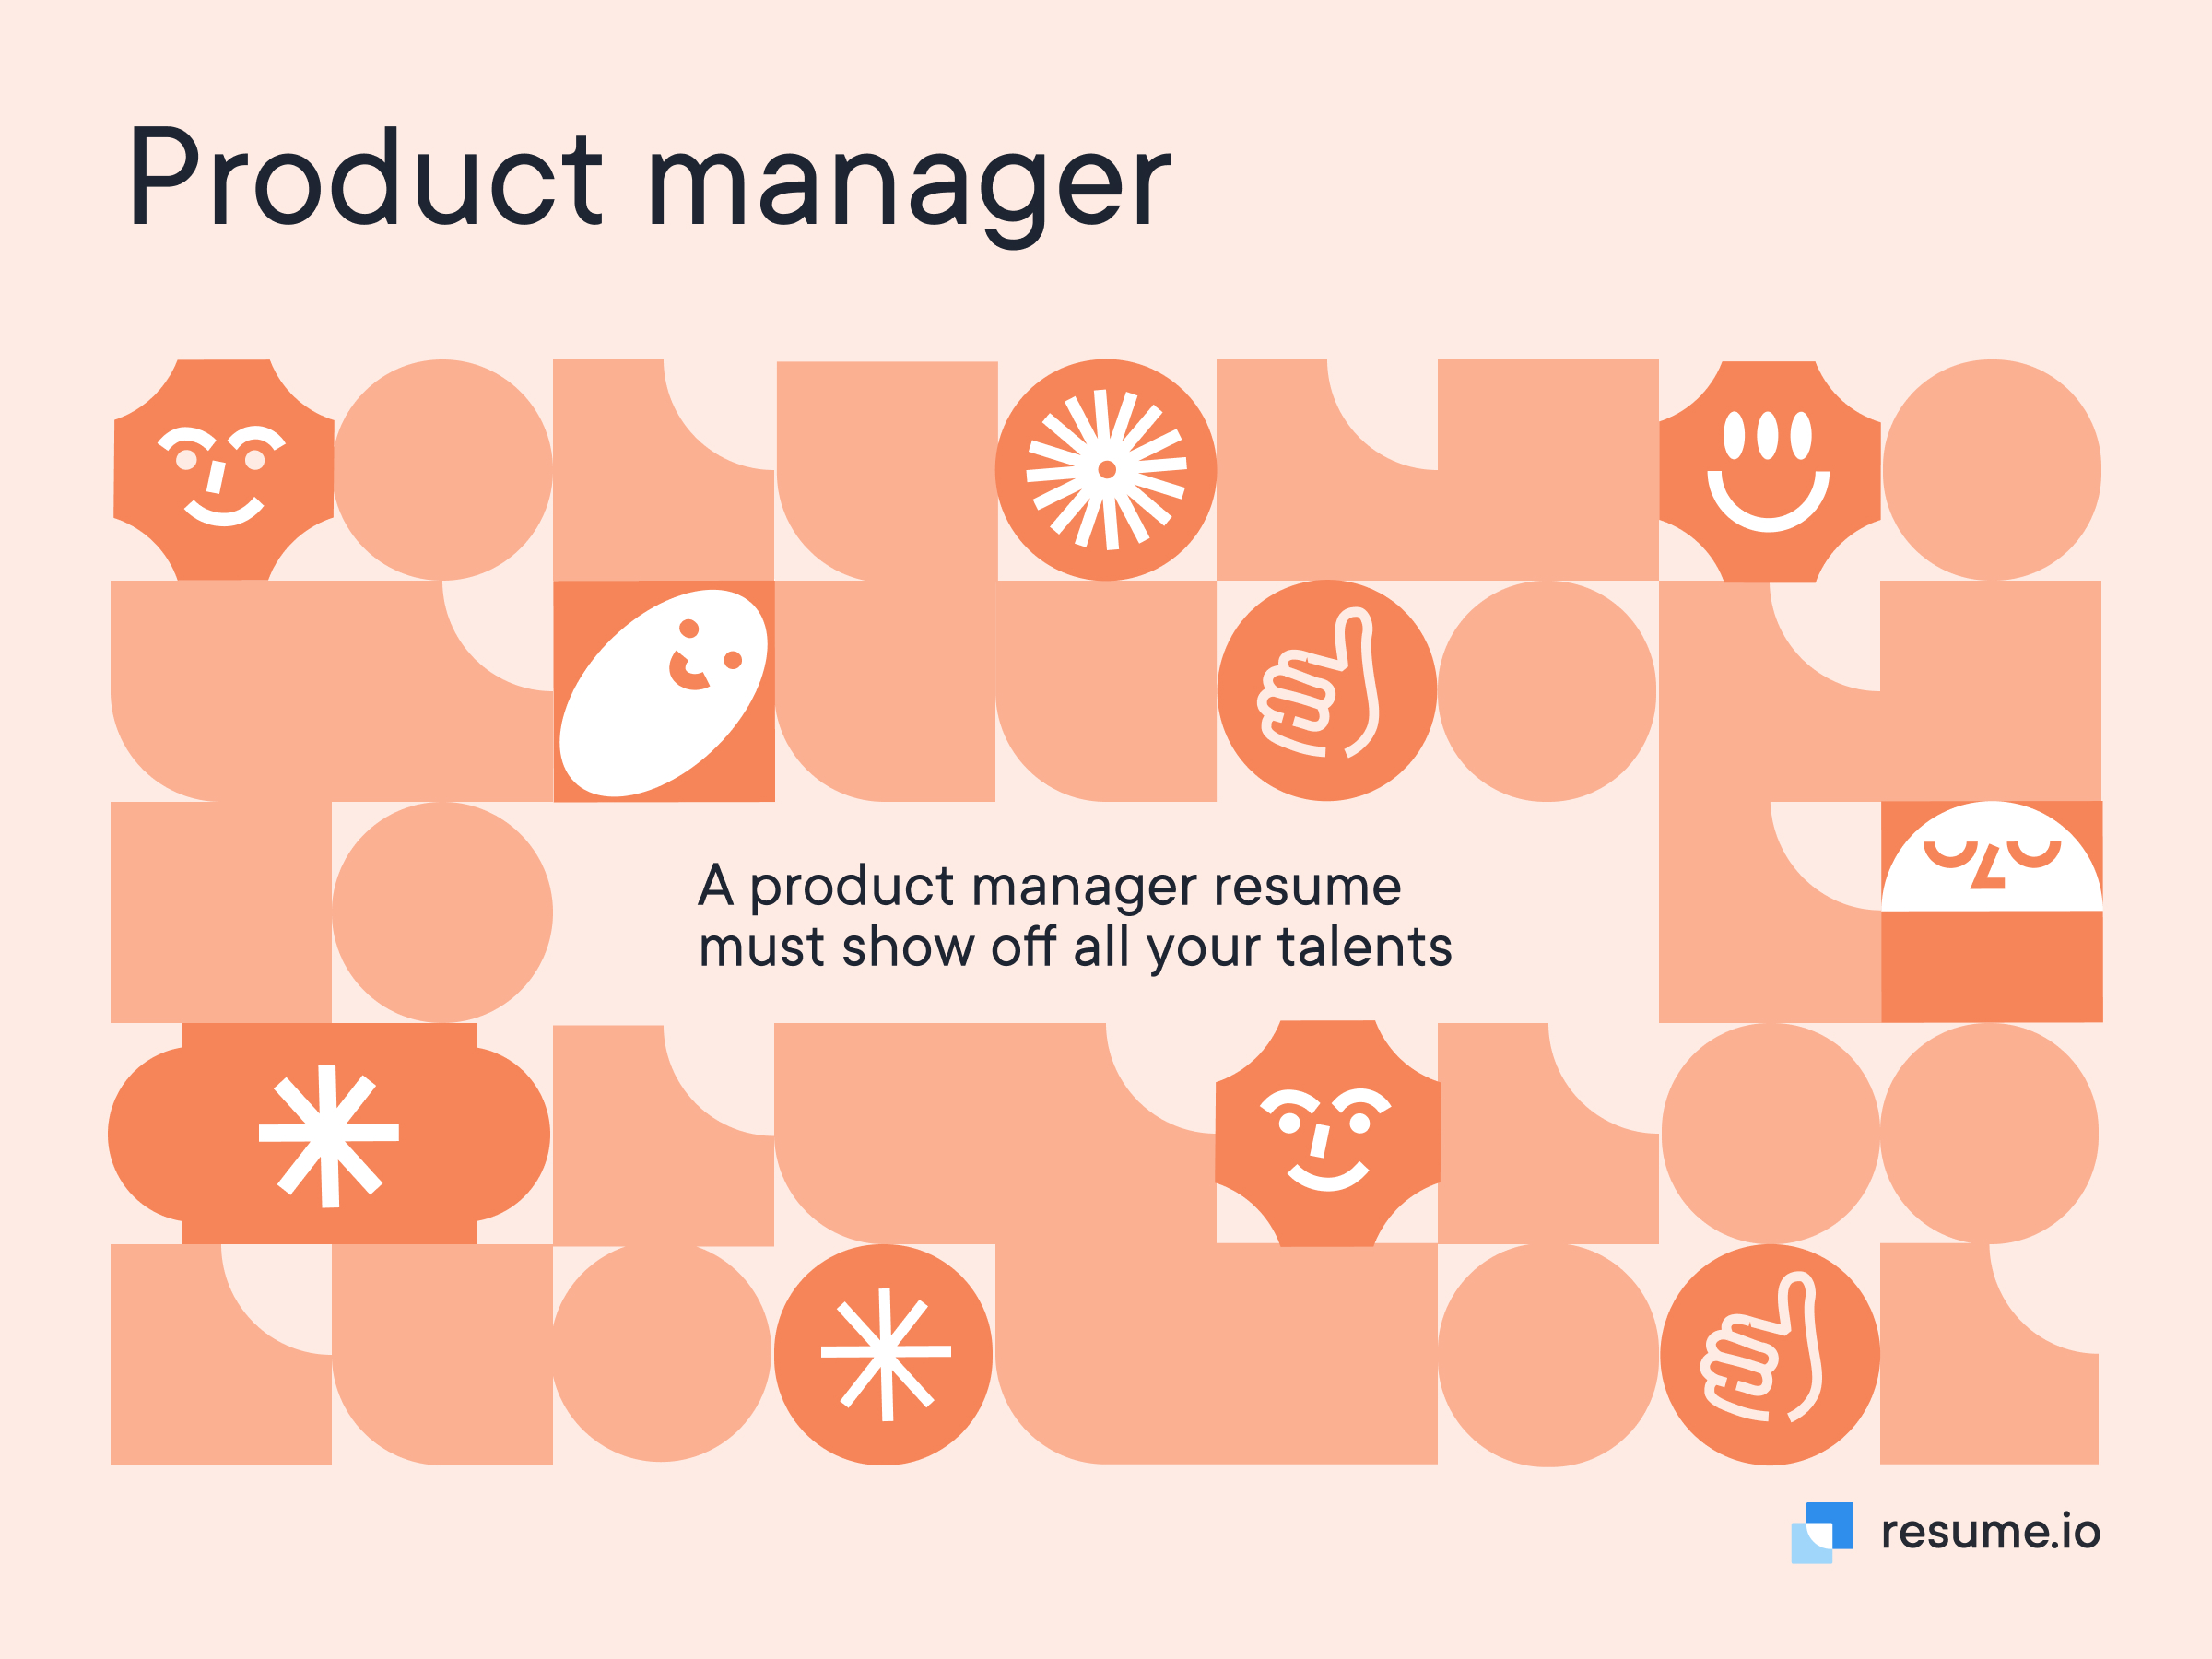 A product manager resume must show off all your talents